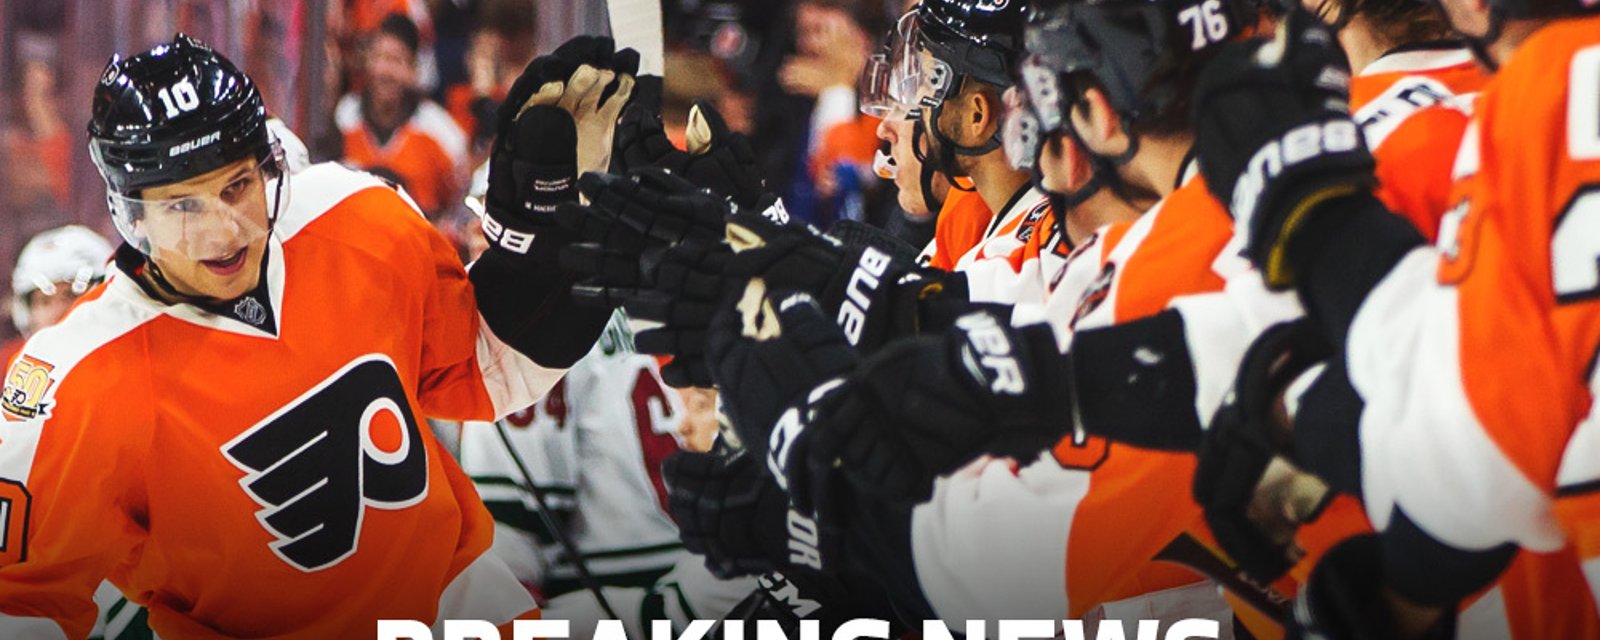 BREAKING: AHL player to step in for injured Flyer.